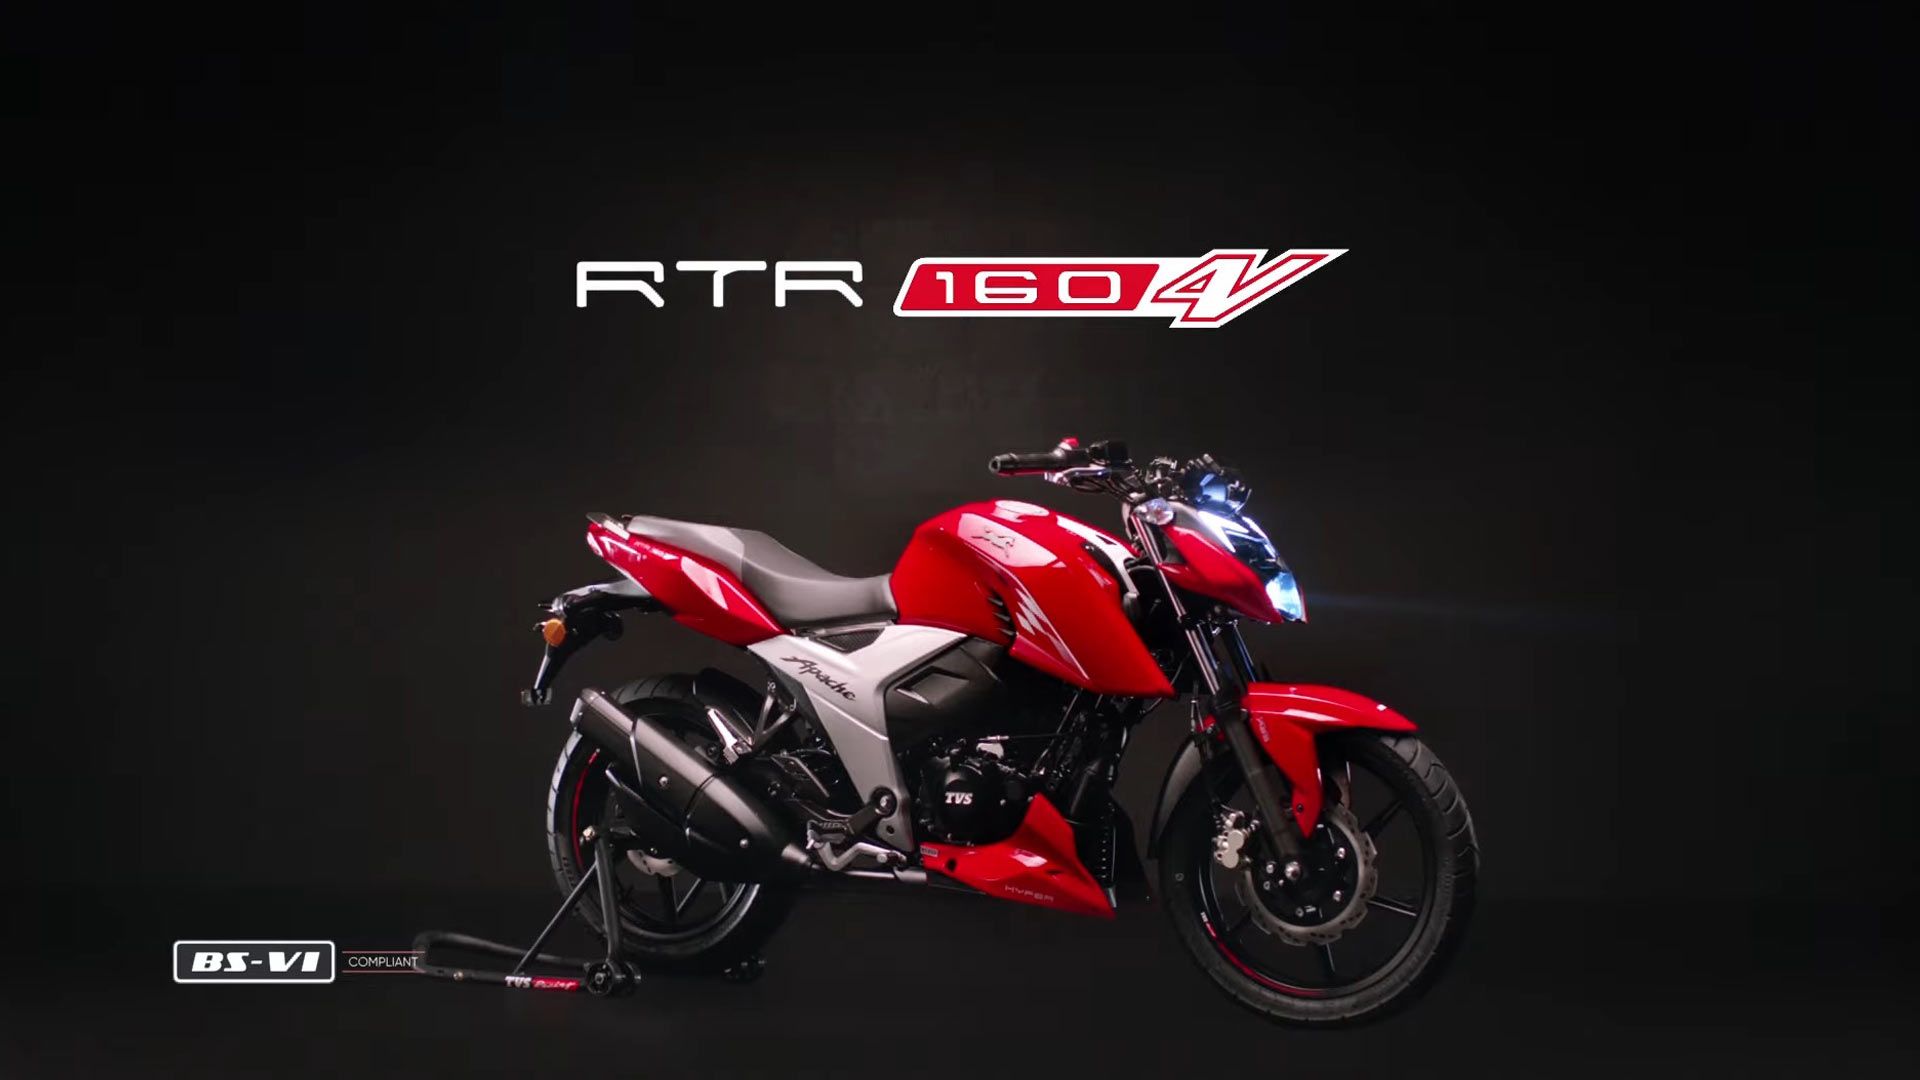 2020 Apache RTR 160 4V Wallpapers - Wallpaper Cave